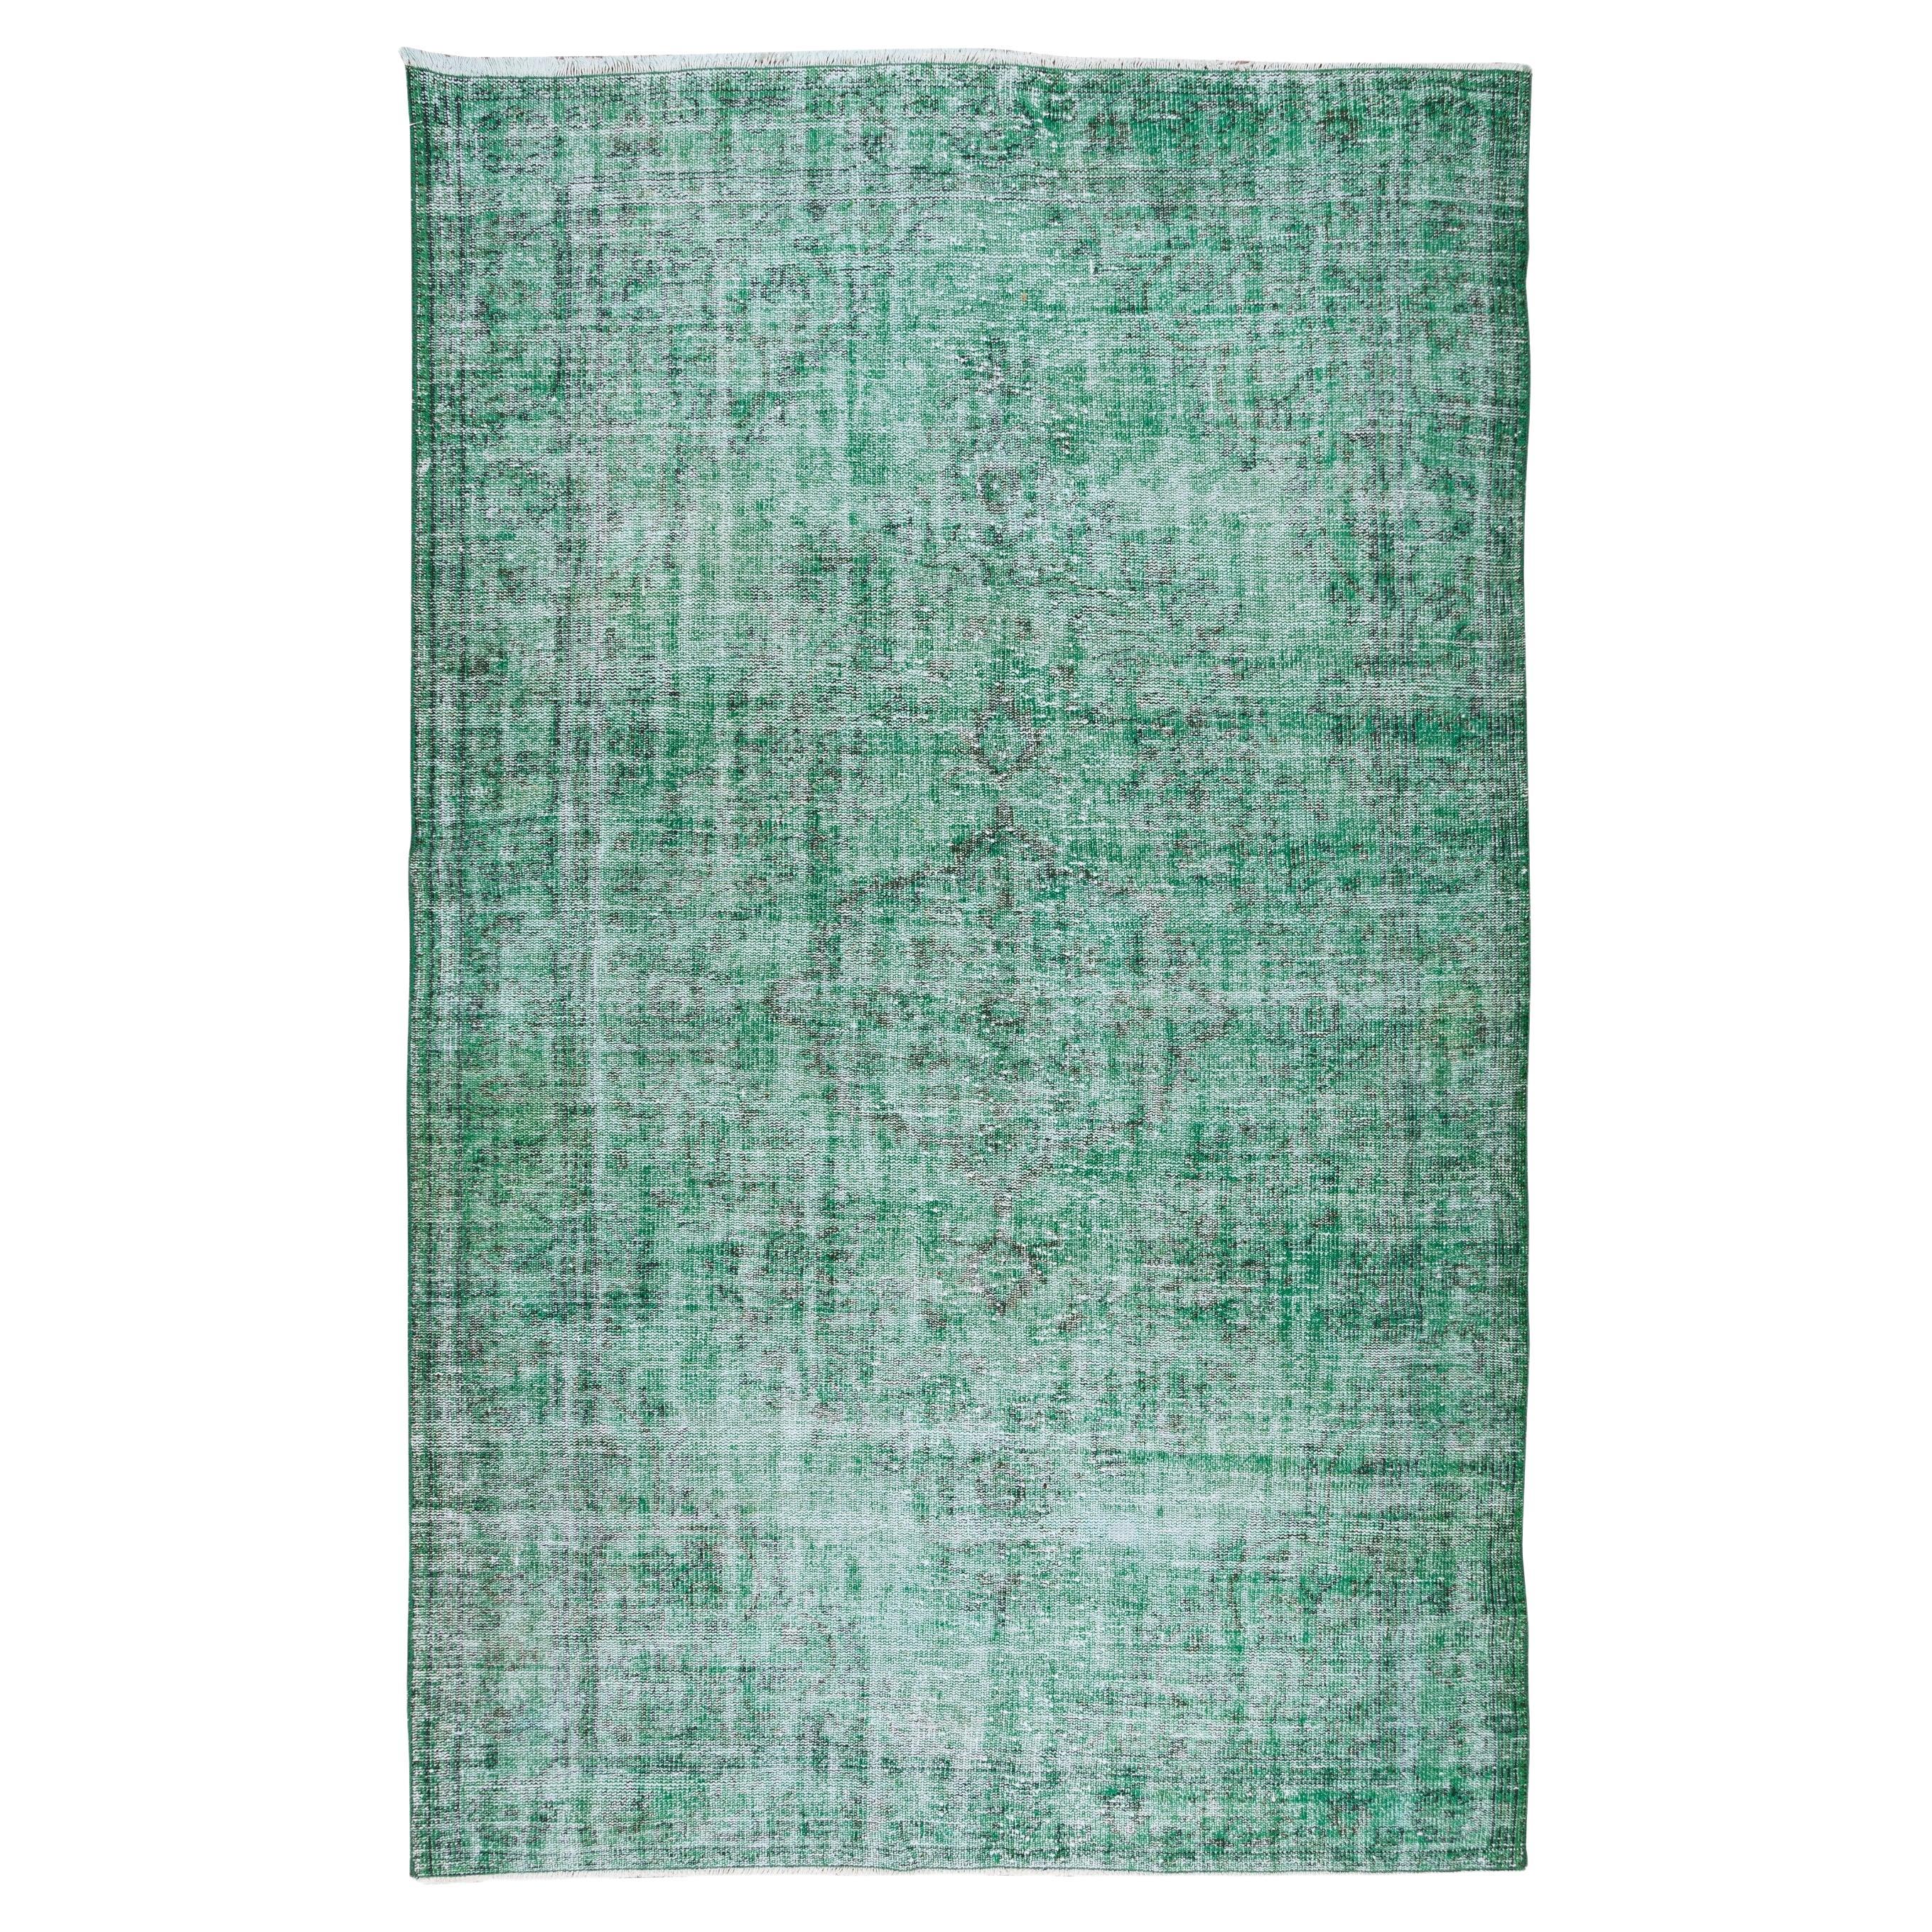 6x9.6 Ft Modern Green Area Rug, Hand Knotted Anatolian Vintage Wool Carpet For Sale